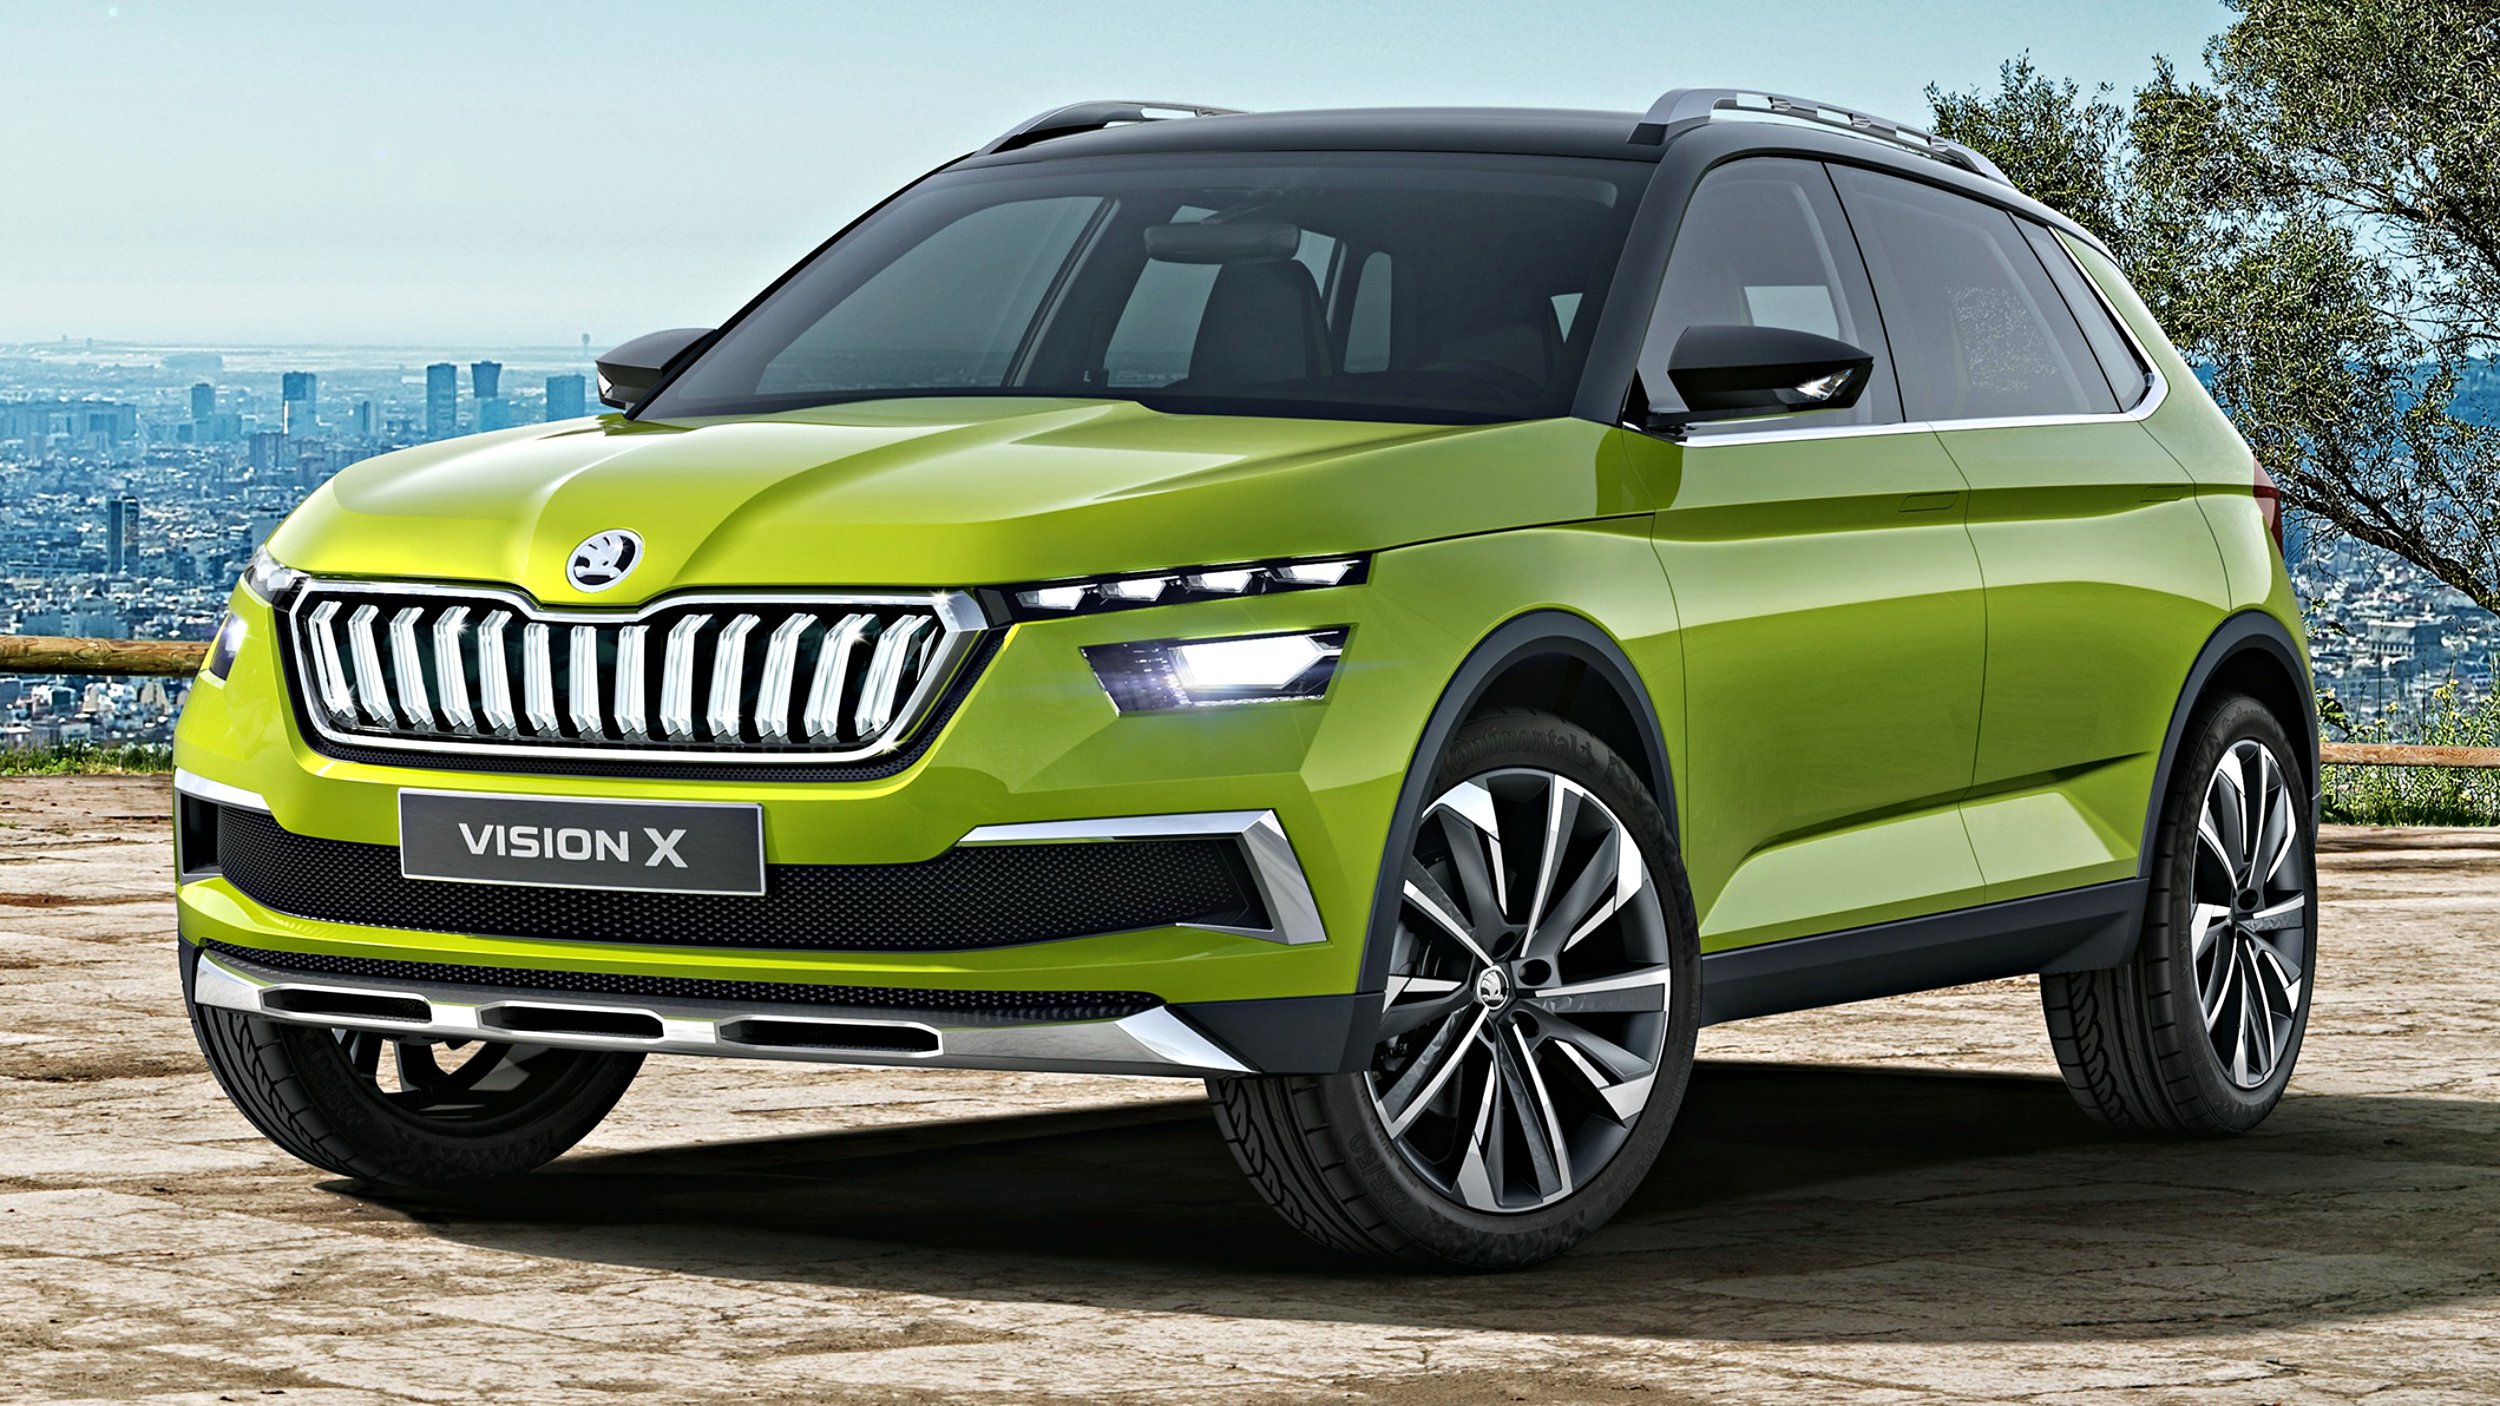 News - Skoda Vision X Concept Shows Off Impending Compact SUV